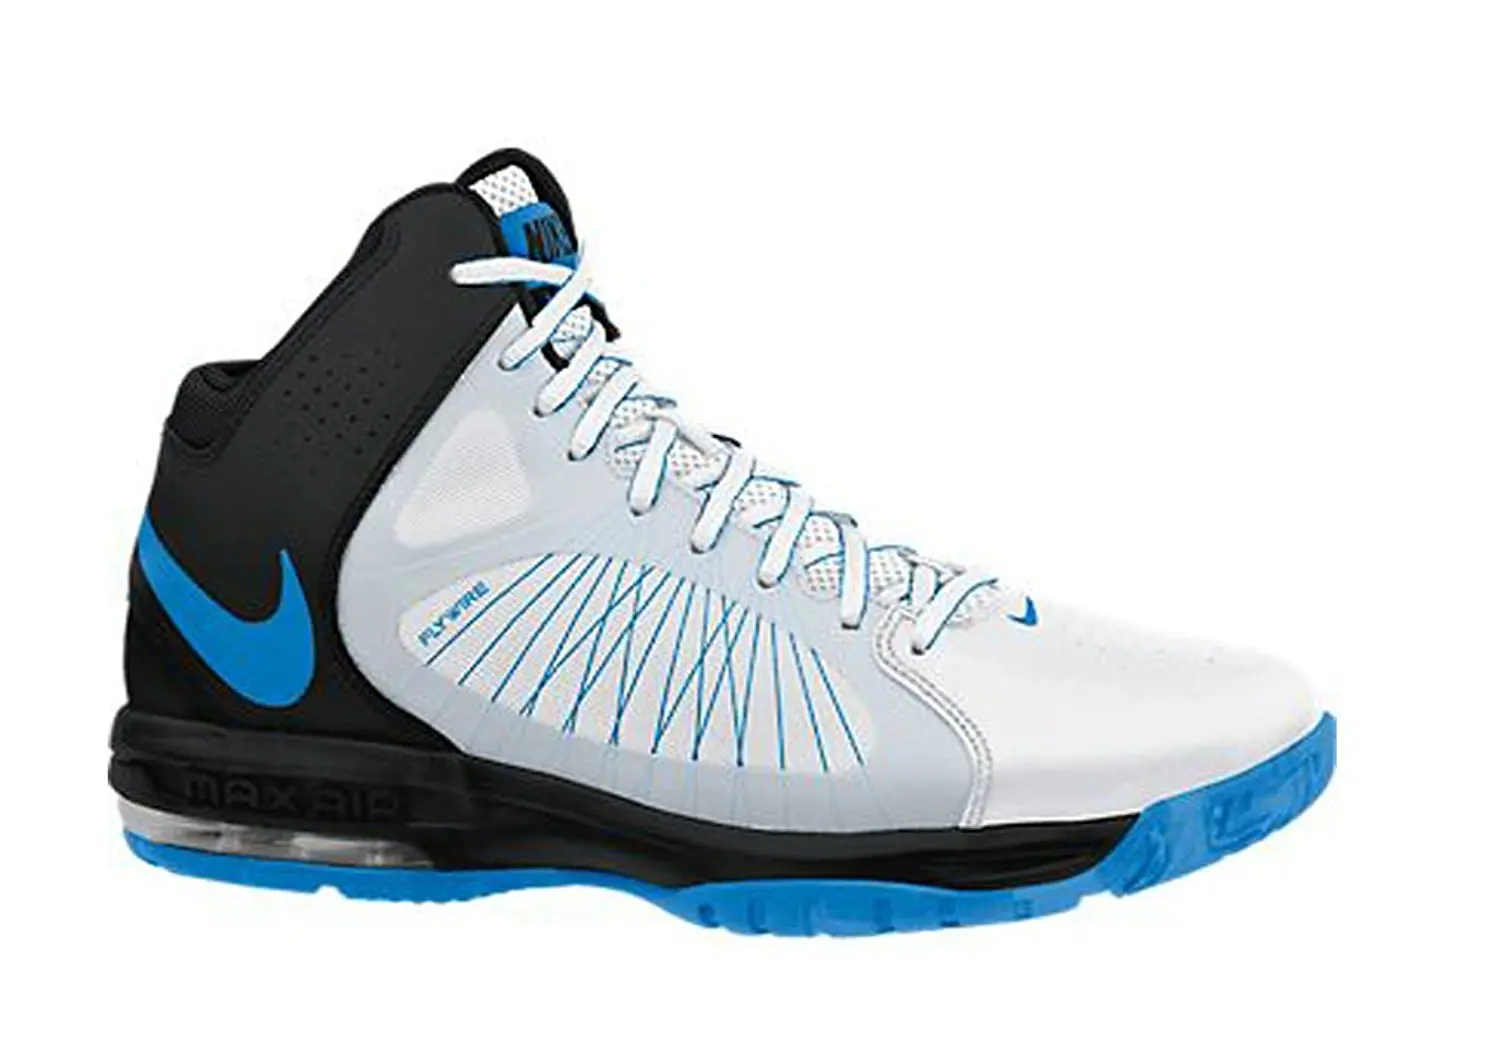 nike mens air max actualizer basketball shoes